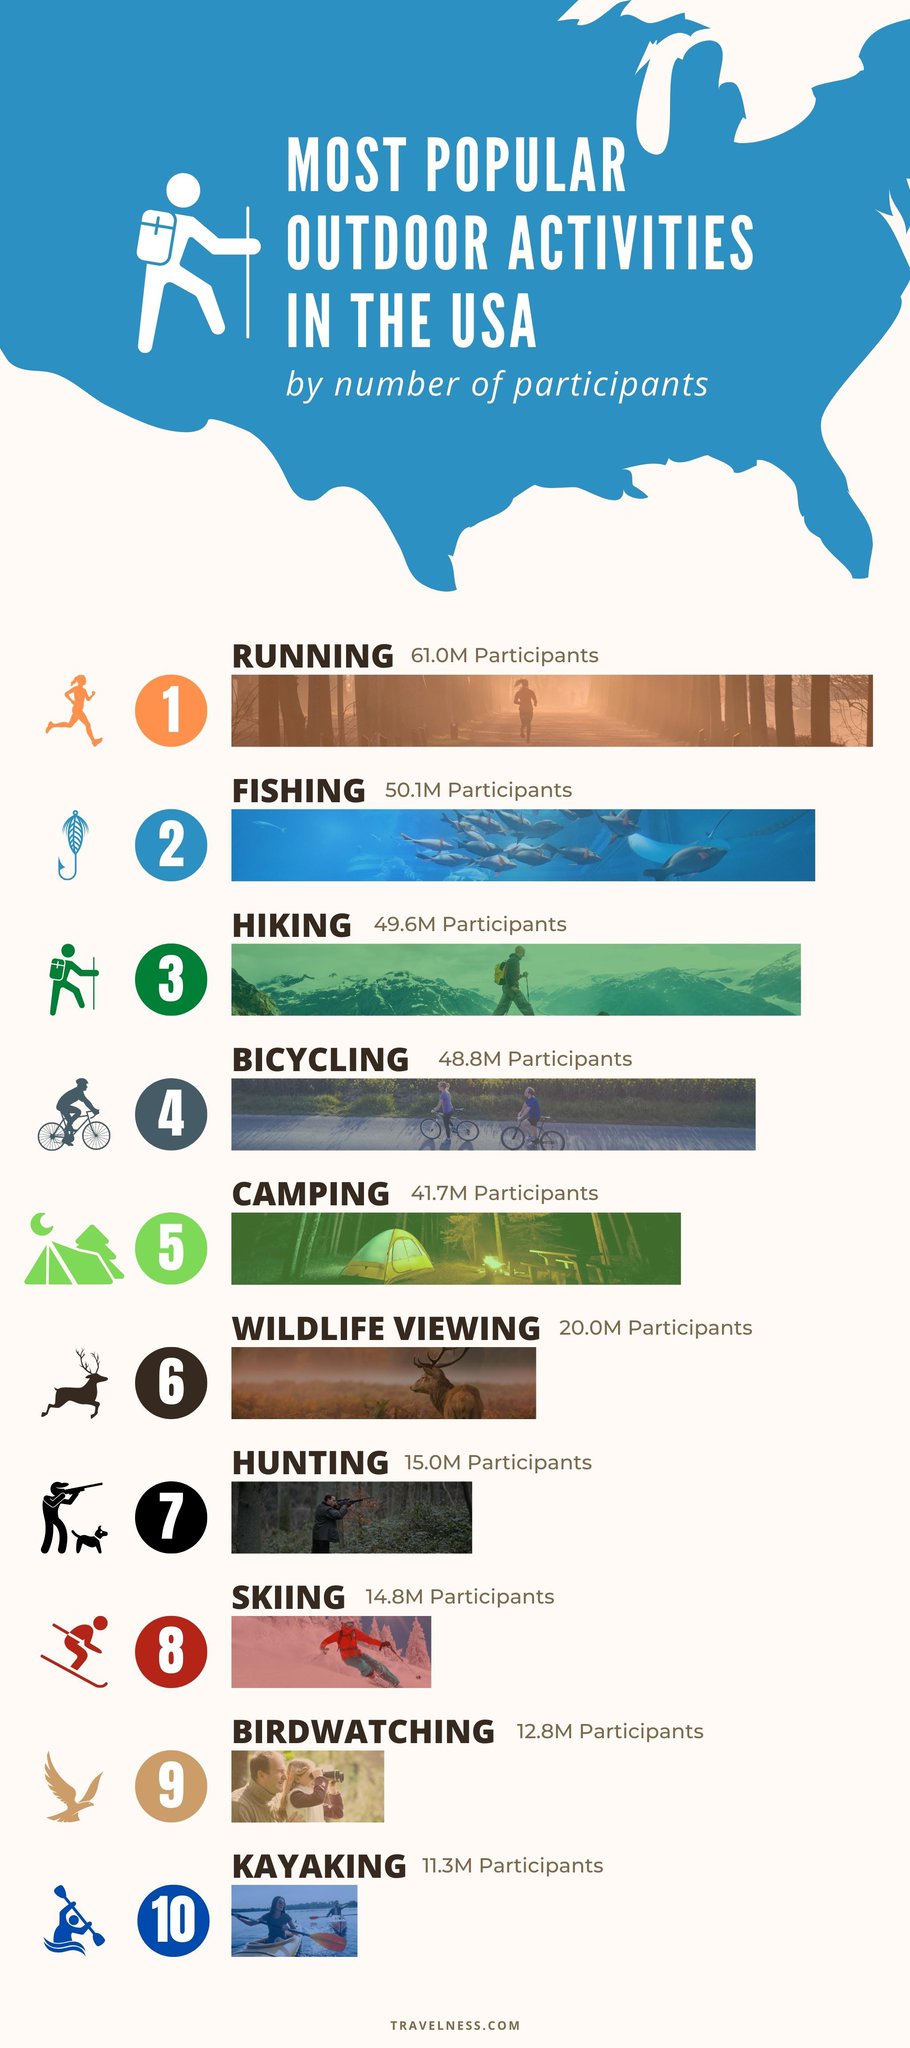 what is outdoor recreation